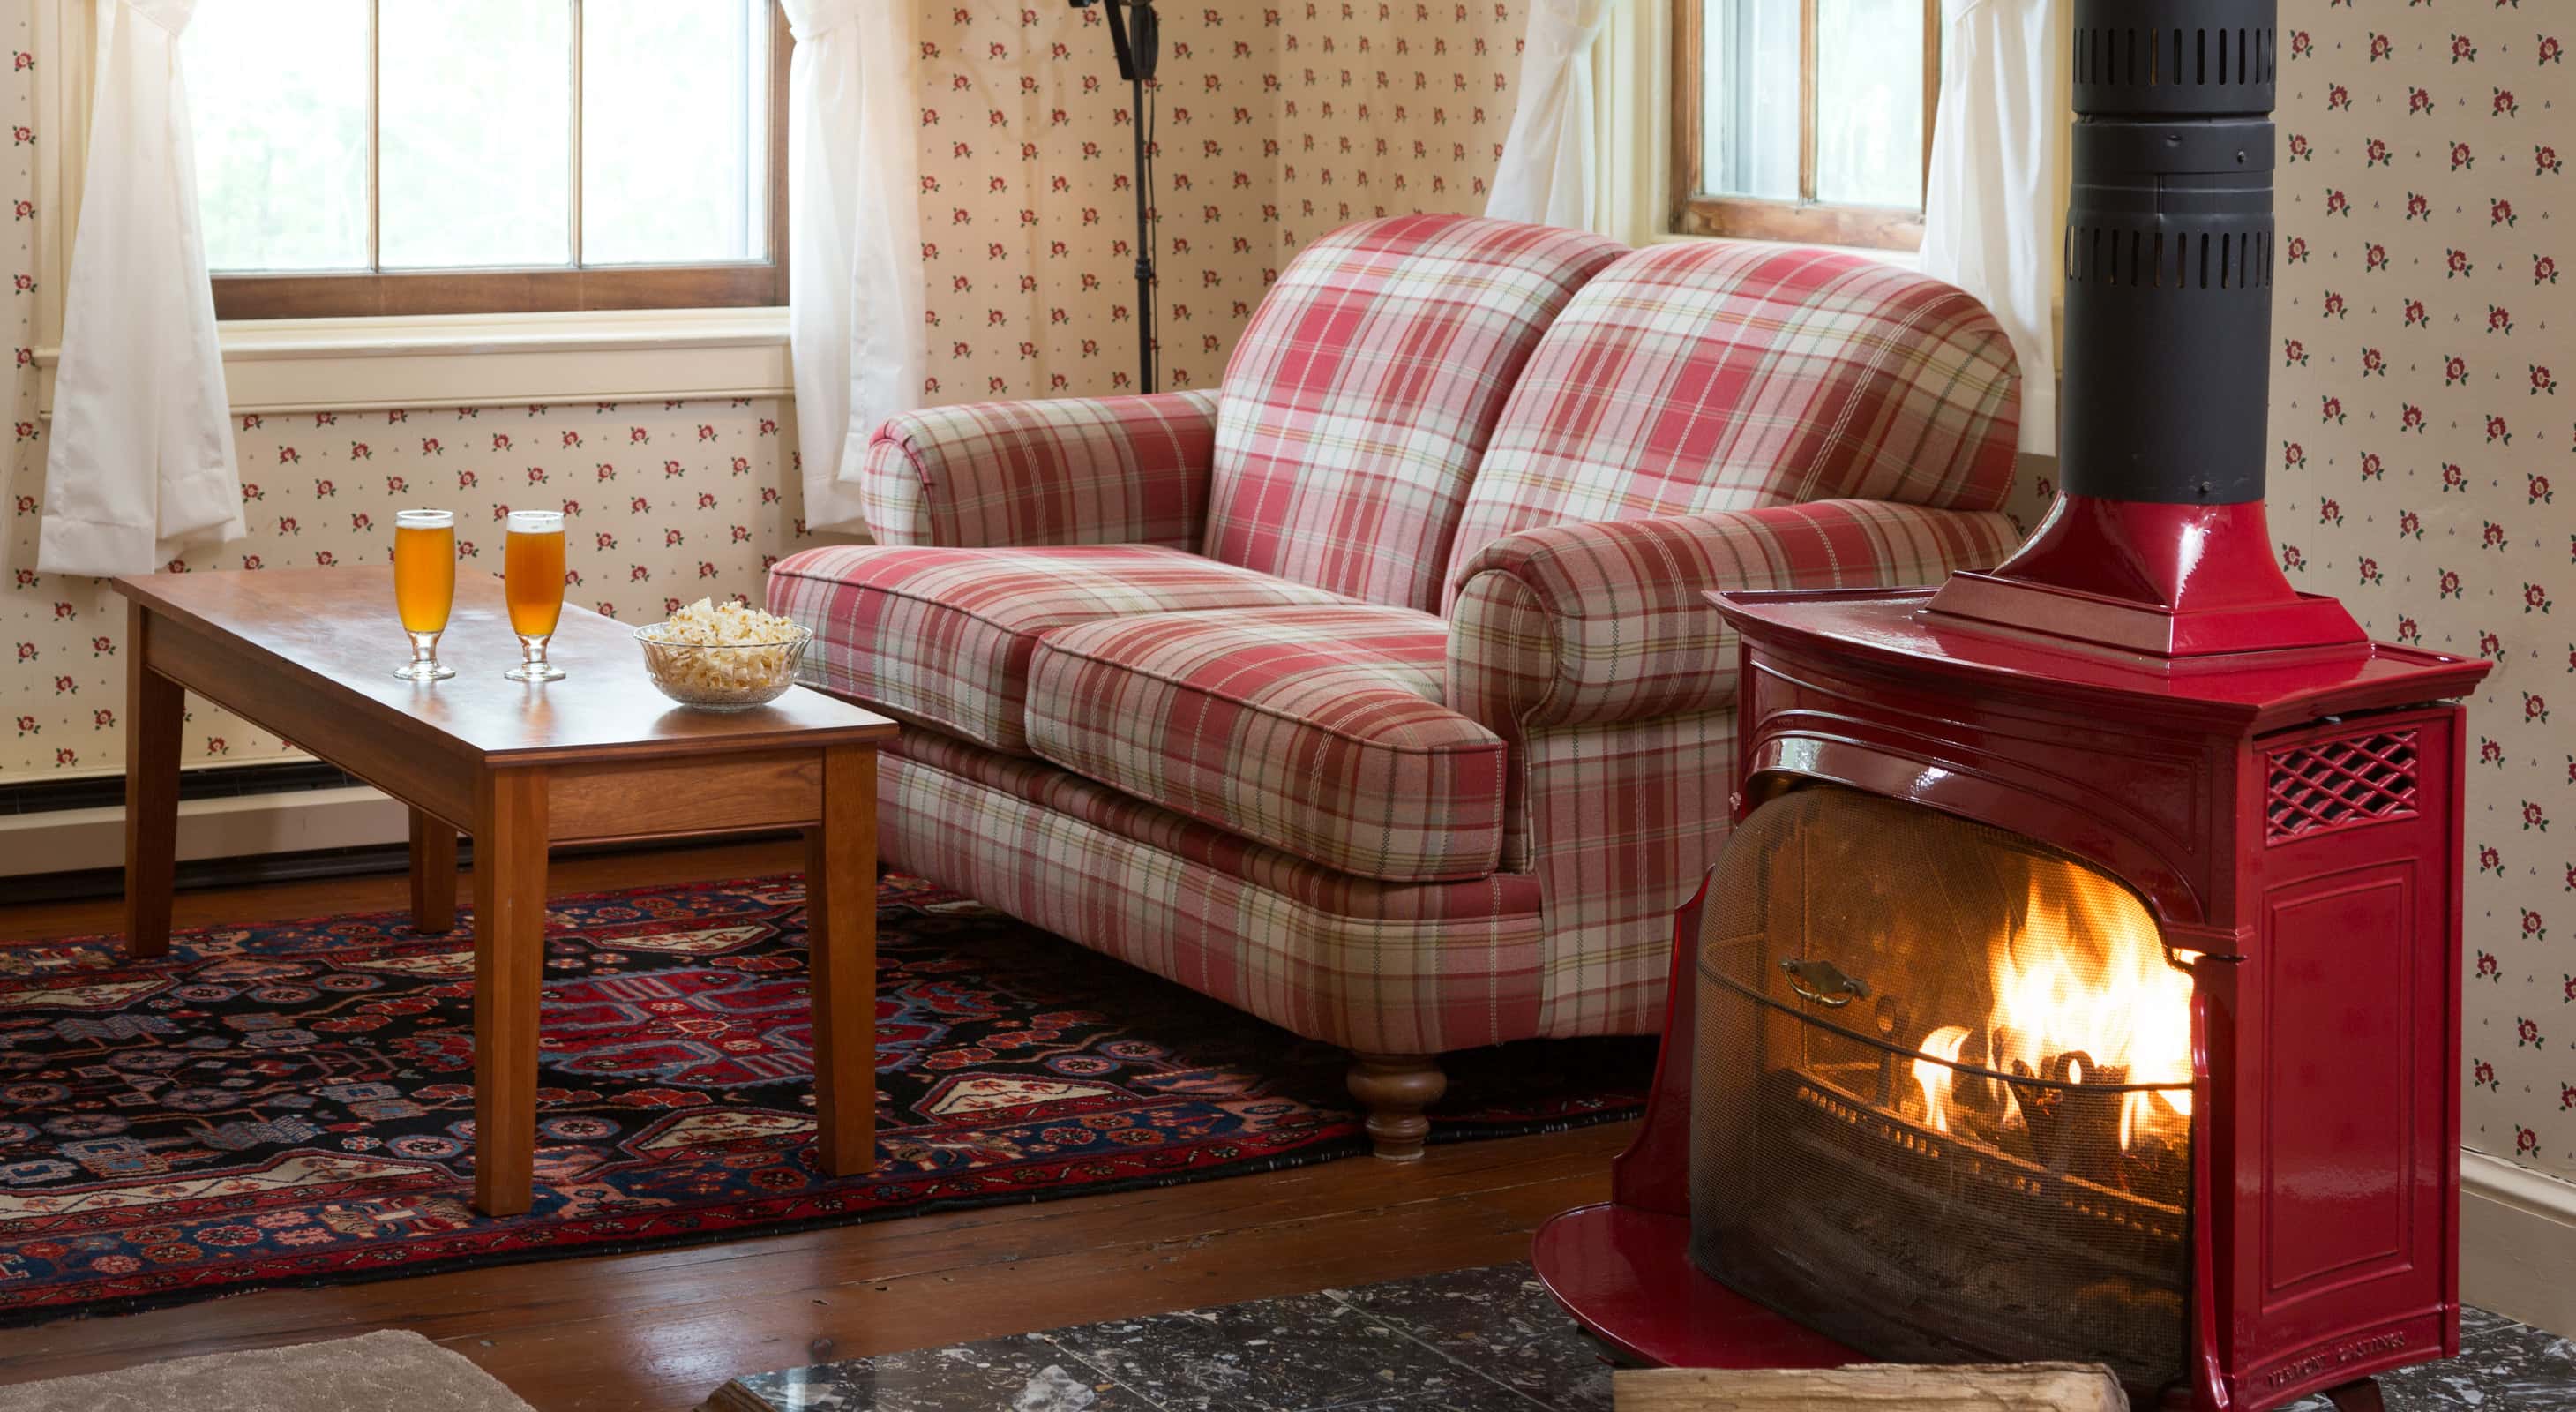 Cozy up next to the wood burning stove in the Red Room, a perfect winter getaway